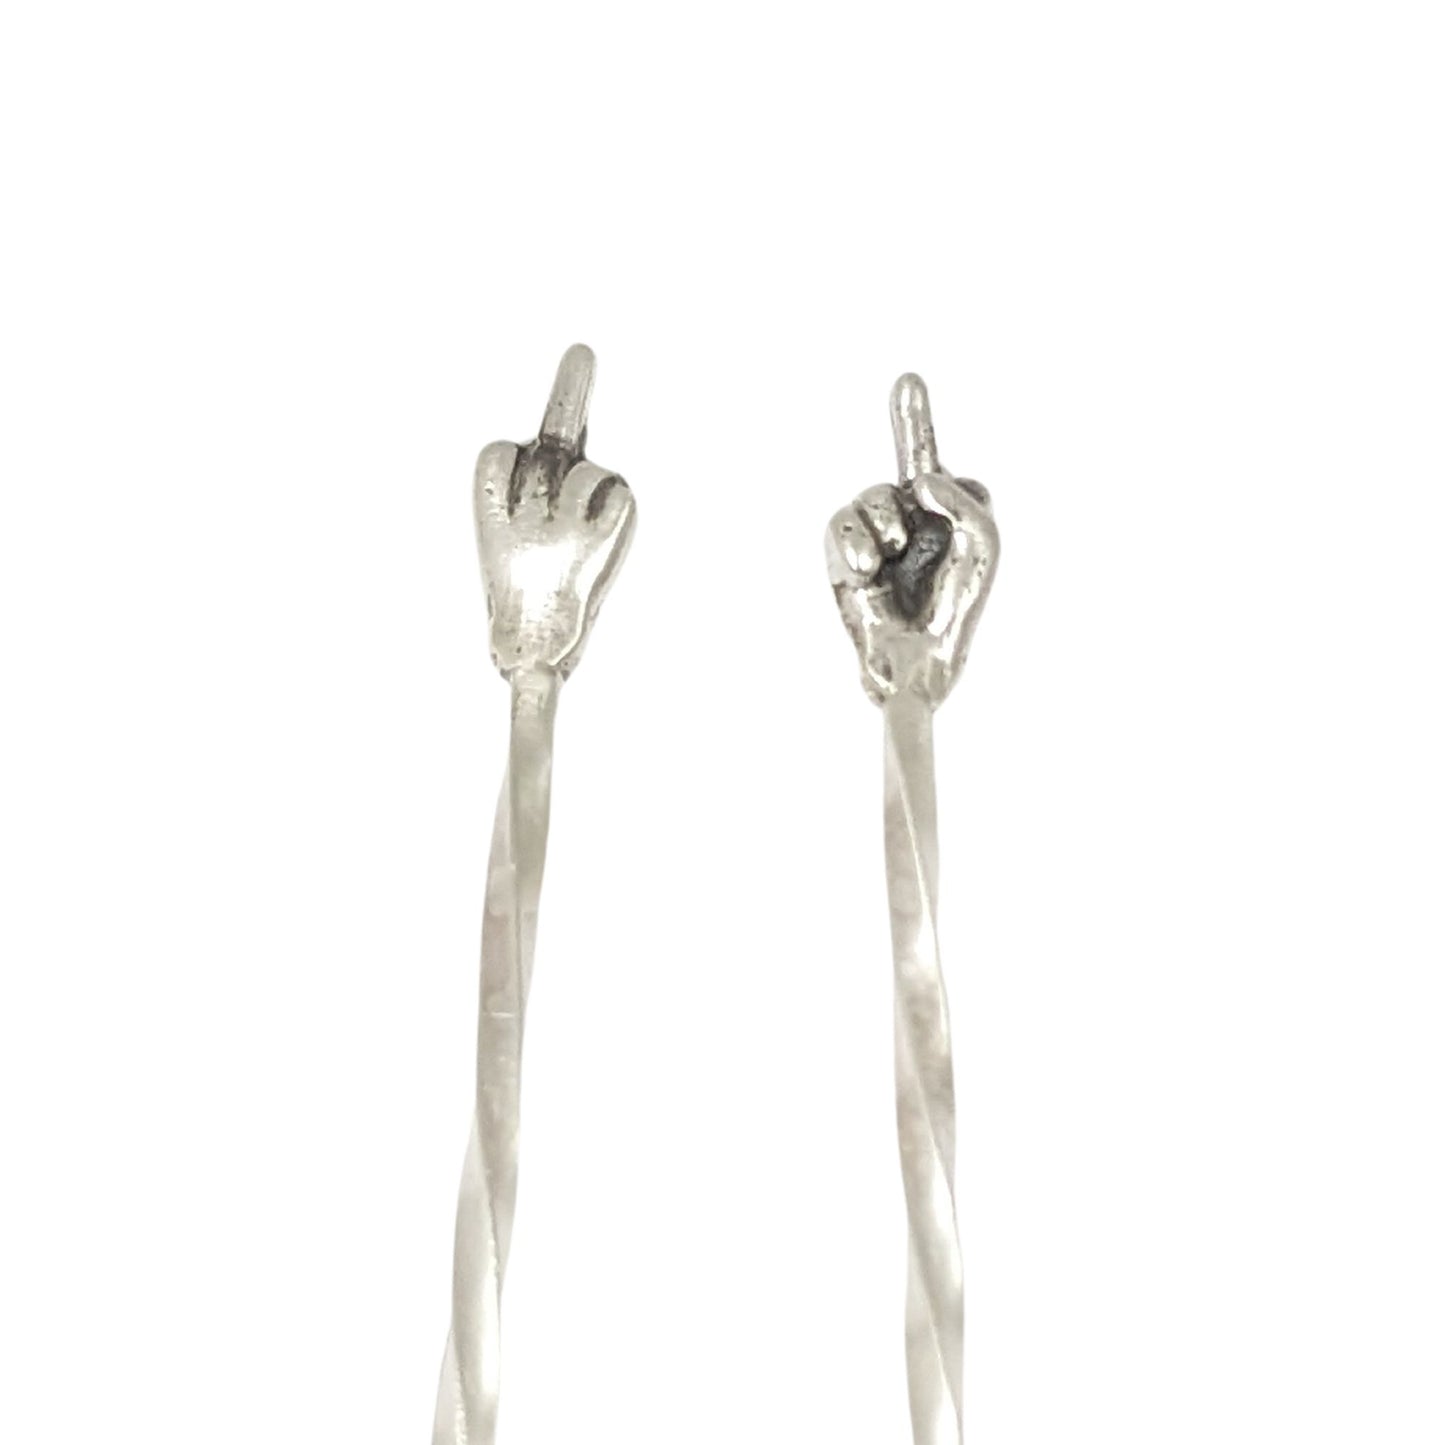 Pair of sterling silver cocktail picks. At the top is a hand with the middle finger raised, ie flipping the bird. One hand faces toward you, the other faces away.